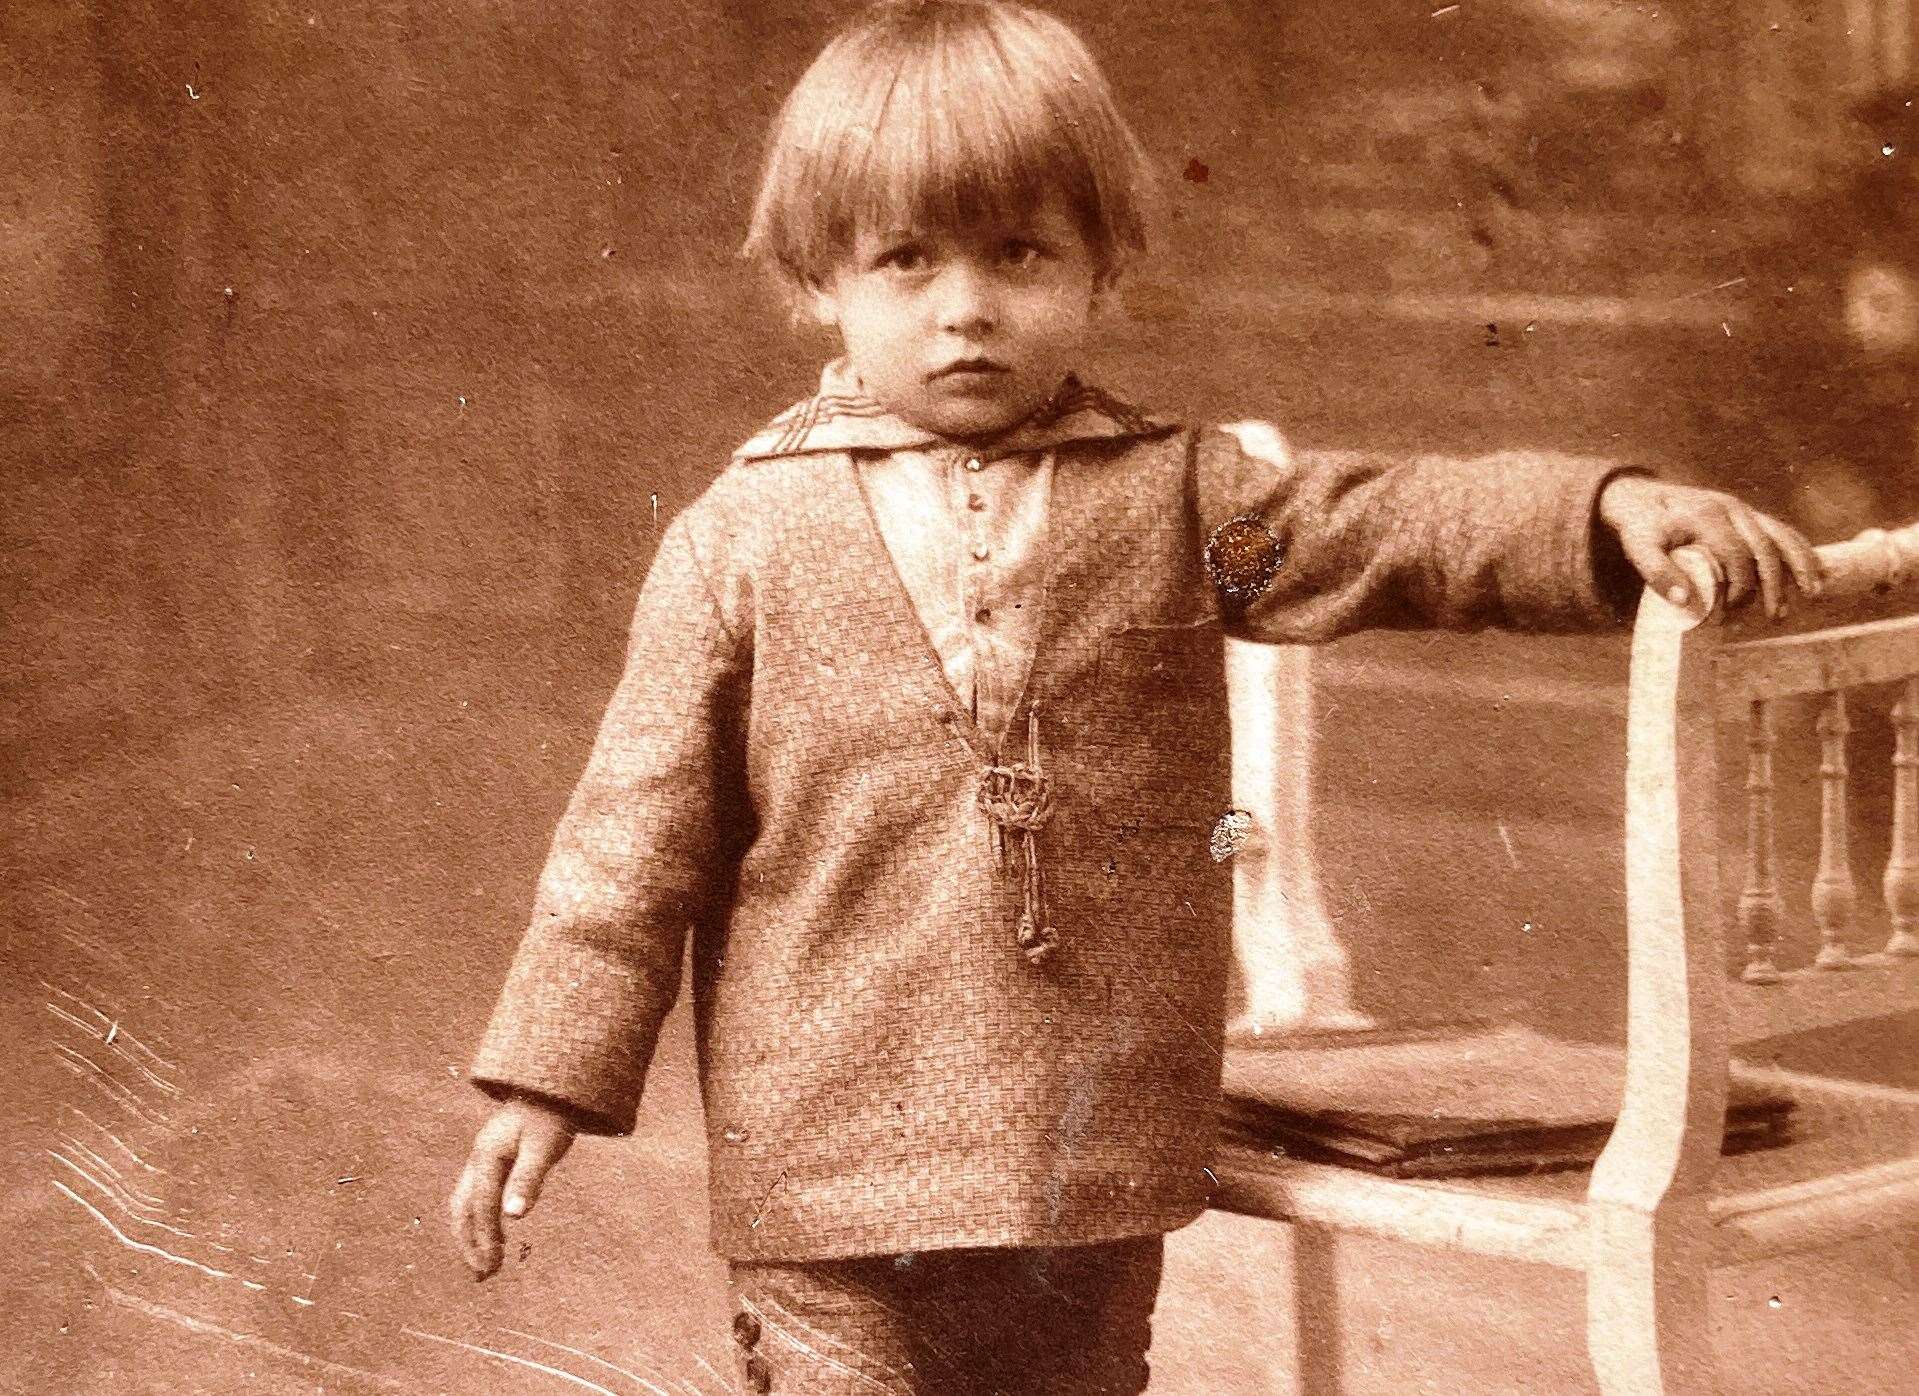 George Smith as a boy growing up in France